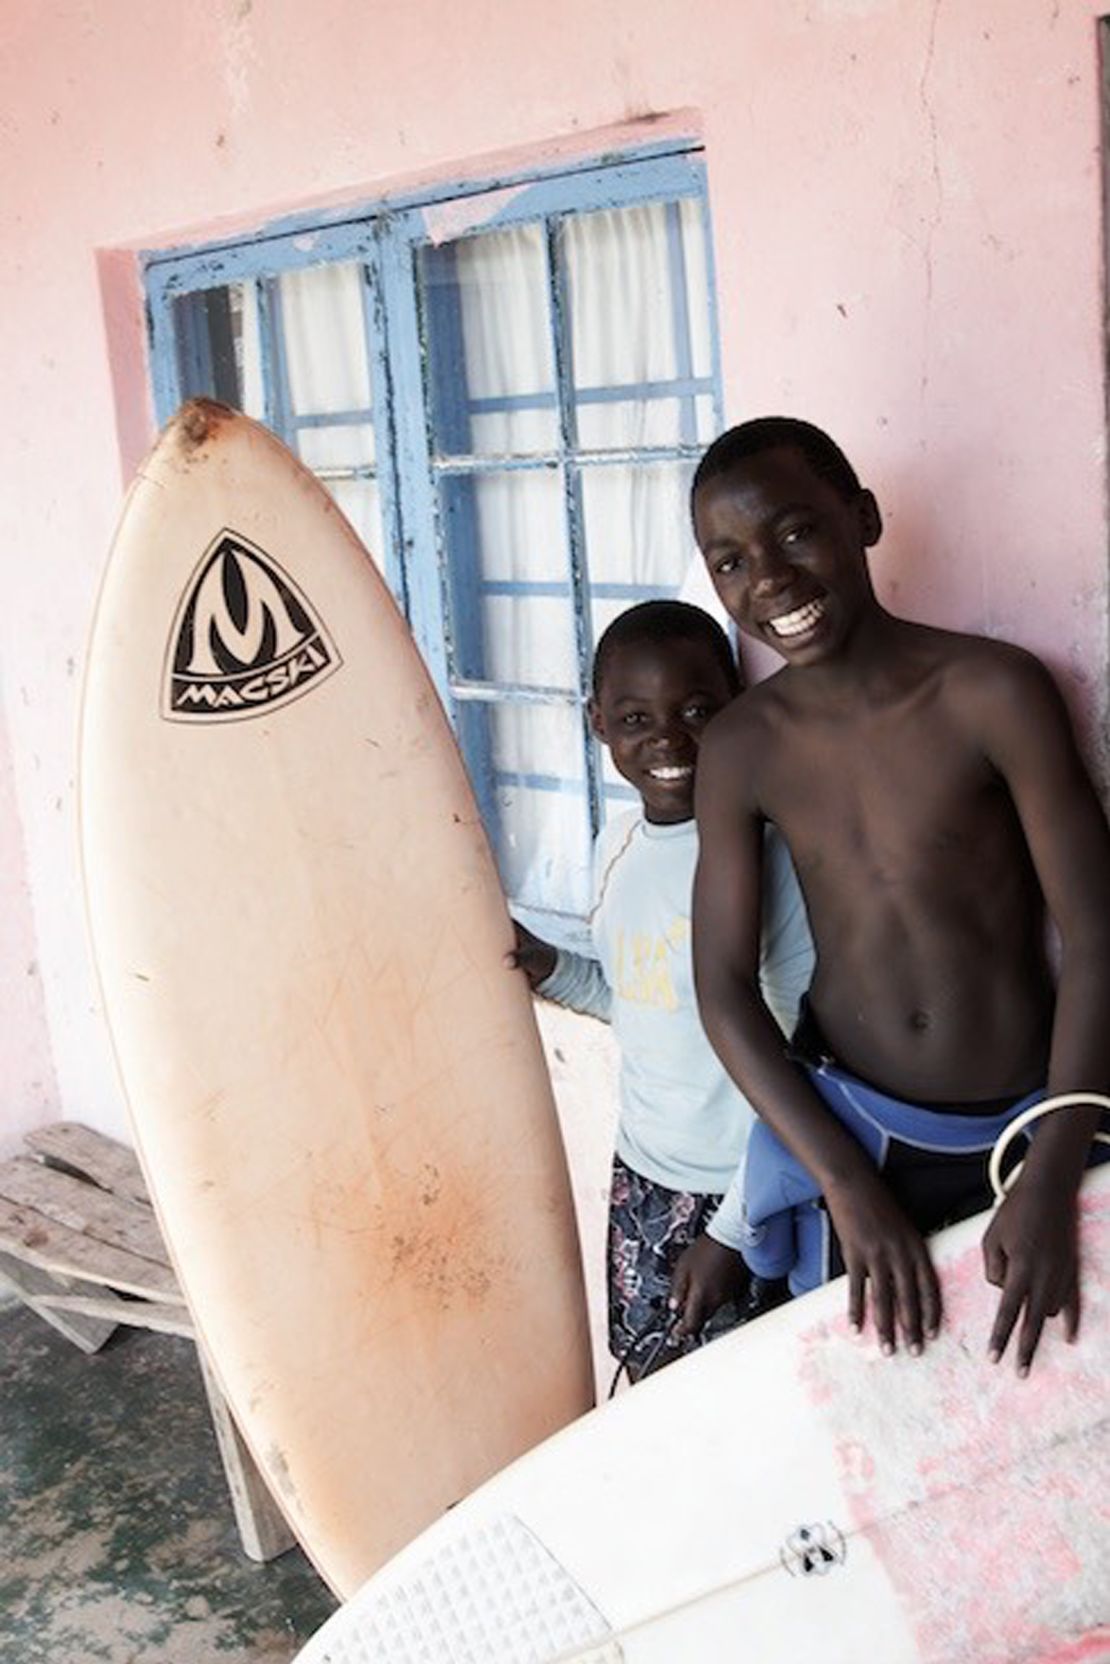 Ndamase says professional surfing isn't always relatable to everyone. 